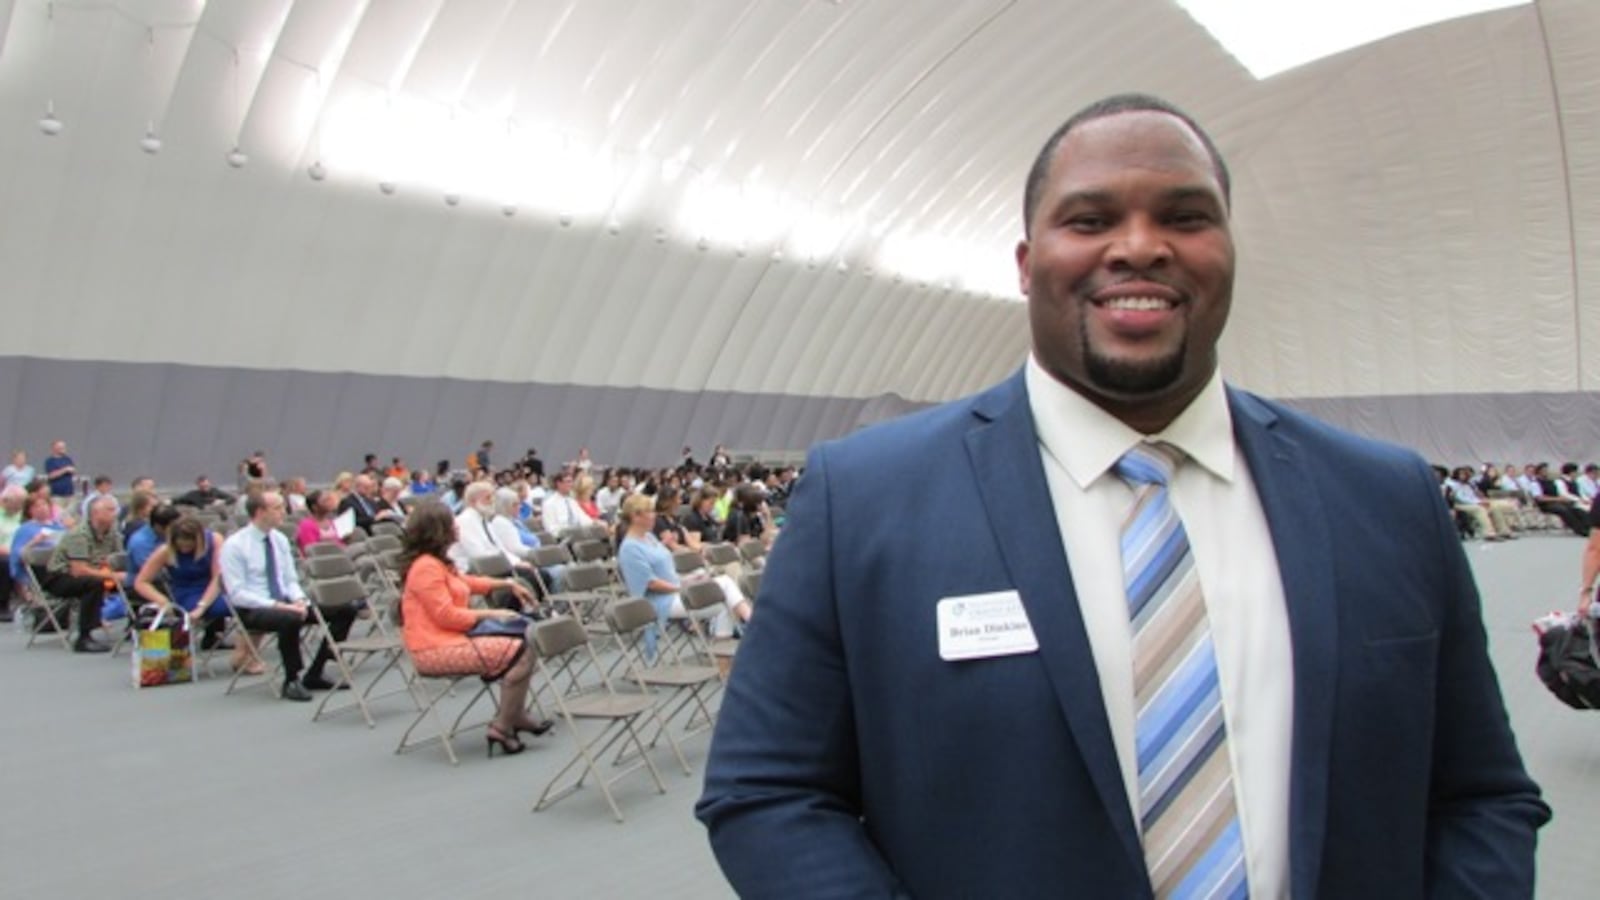 Brian Dinkins is principal of Providence Cristo Rey High School.